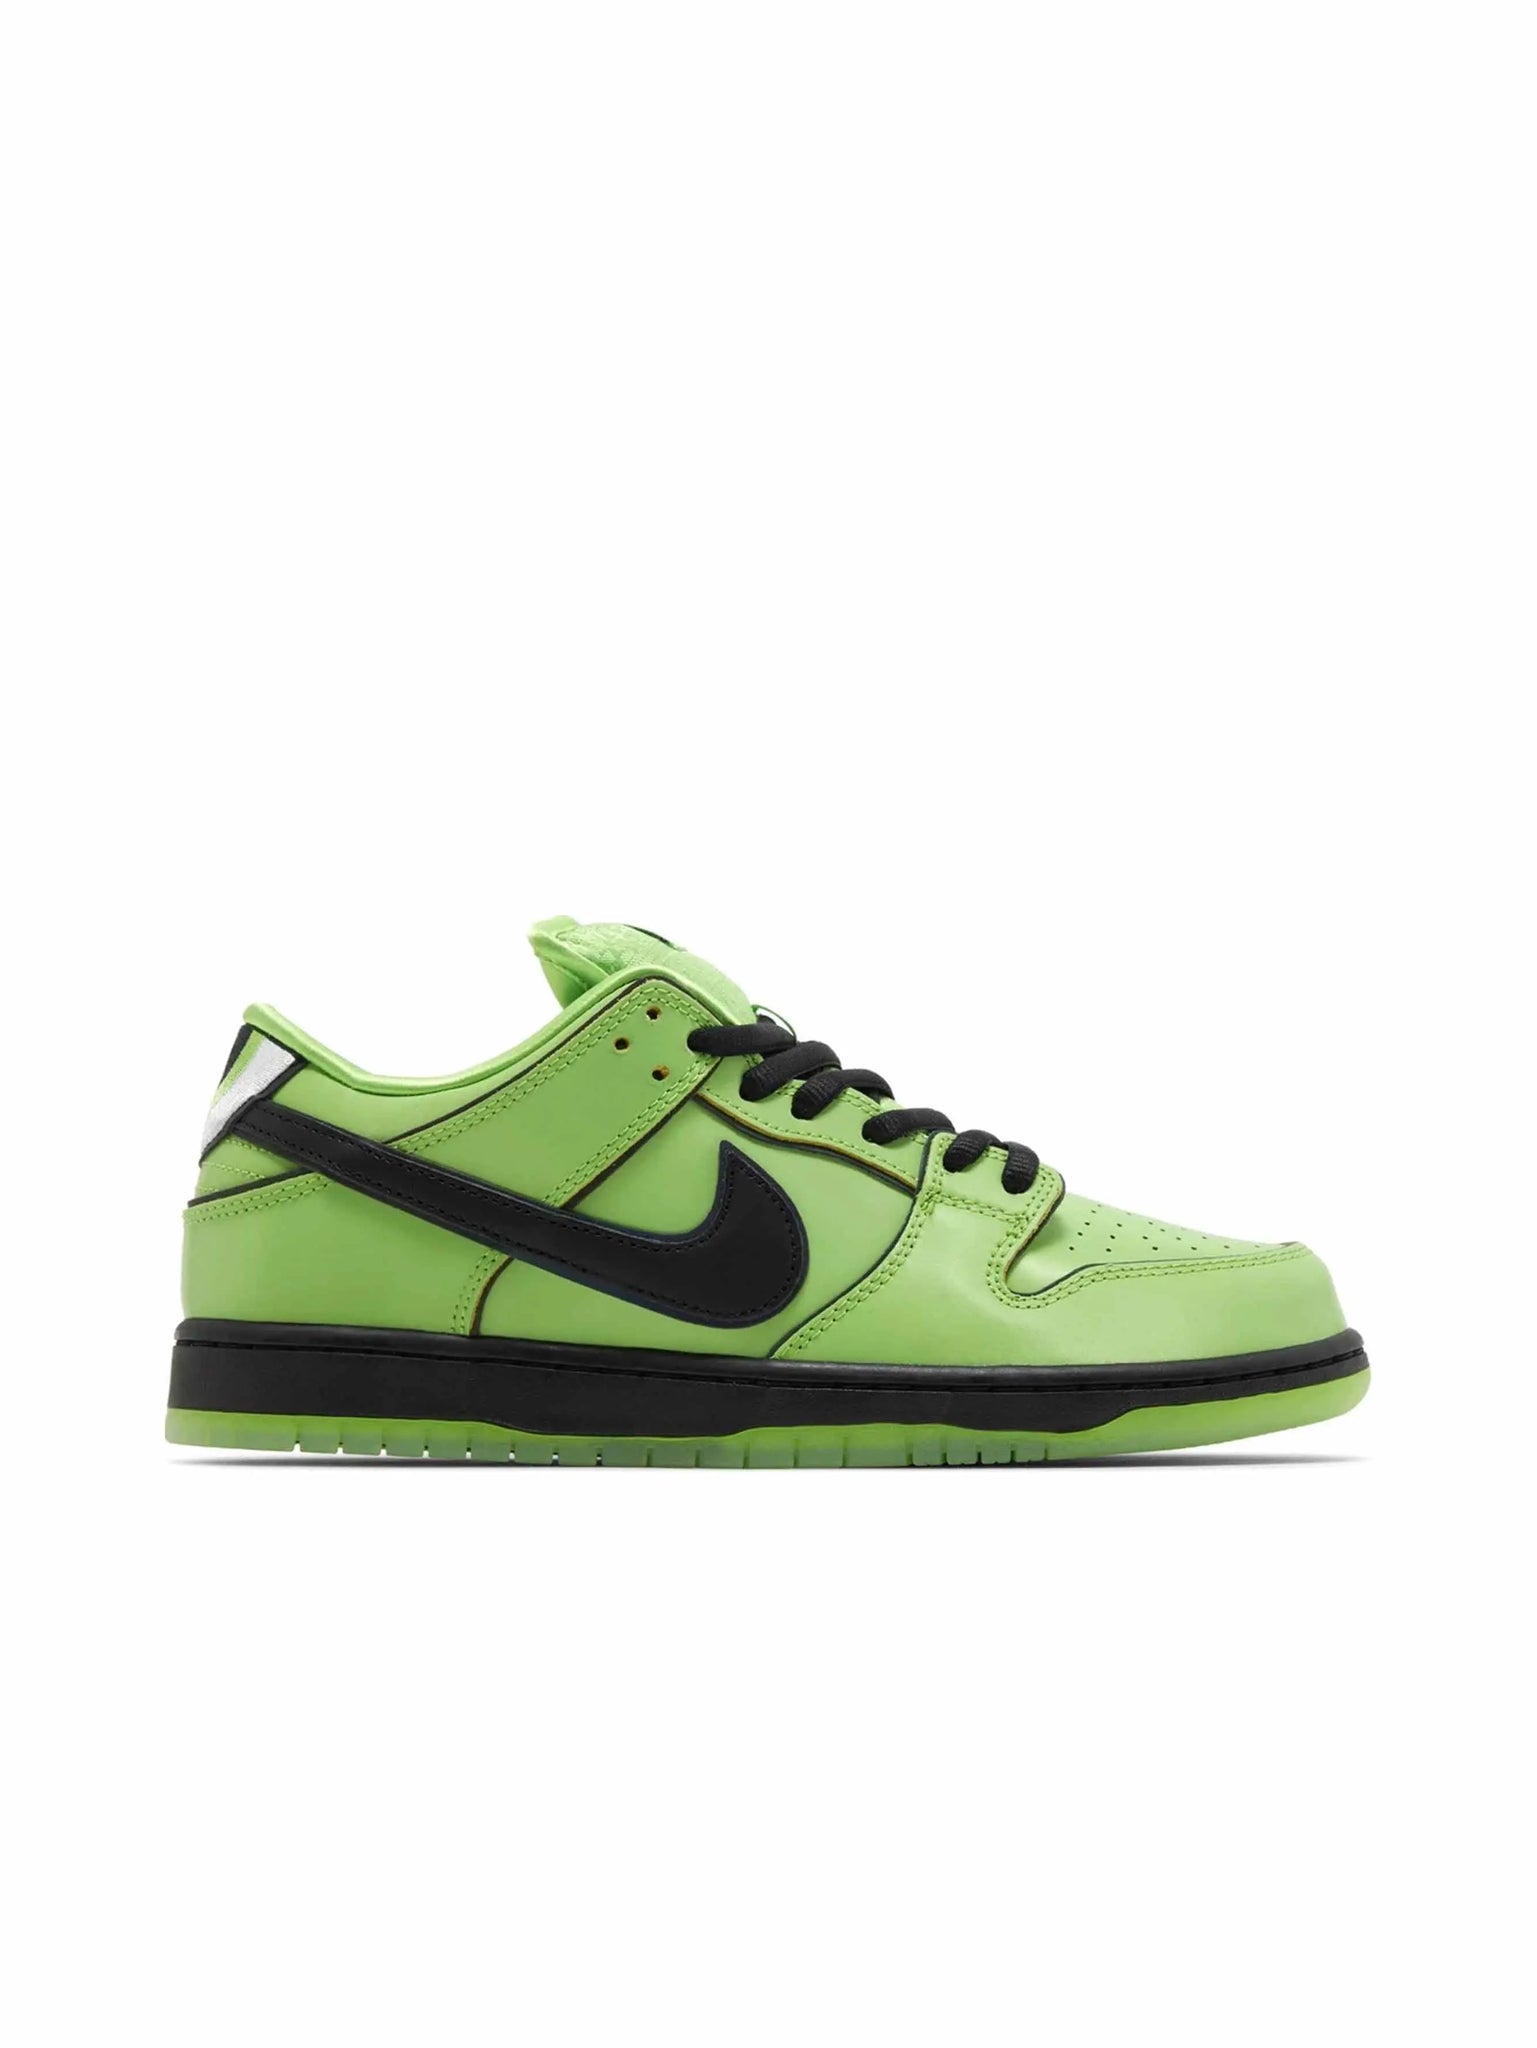 Nike SB Dunk Low The Powerpuff Girls Buttercup in Auckland, New Zealand - Shop name